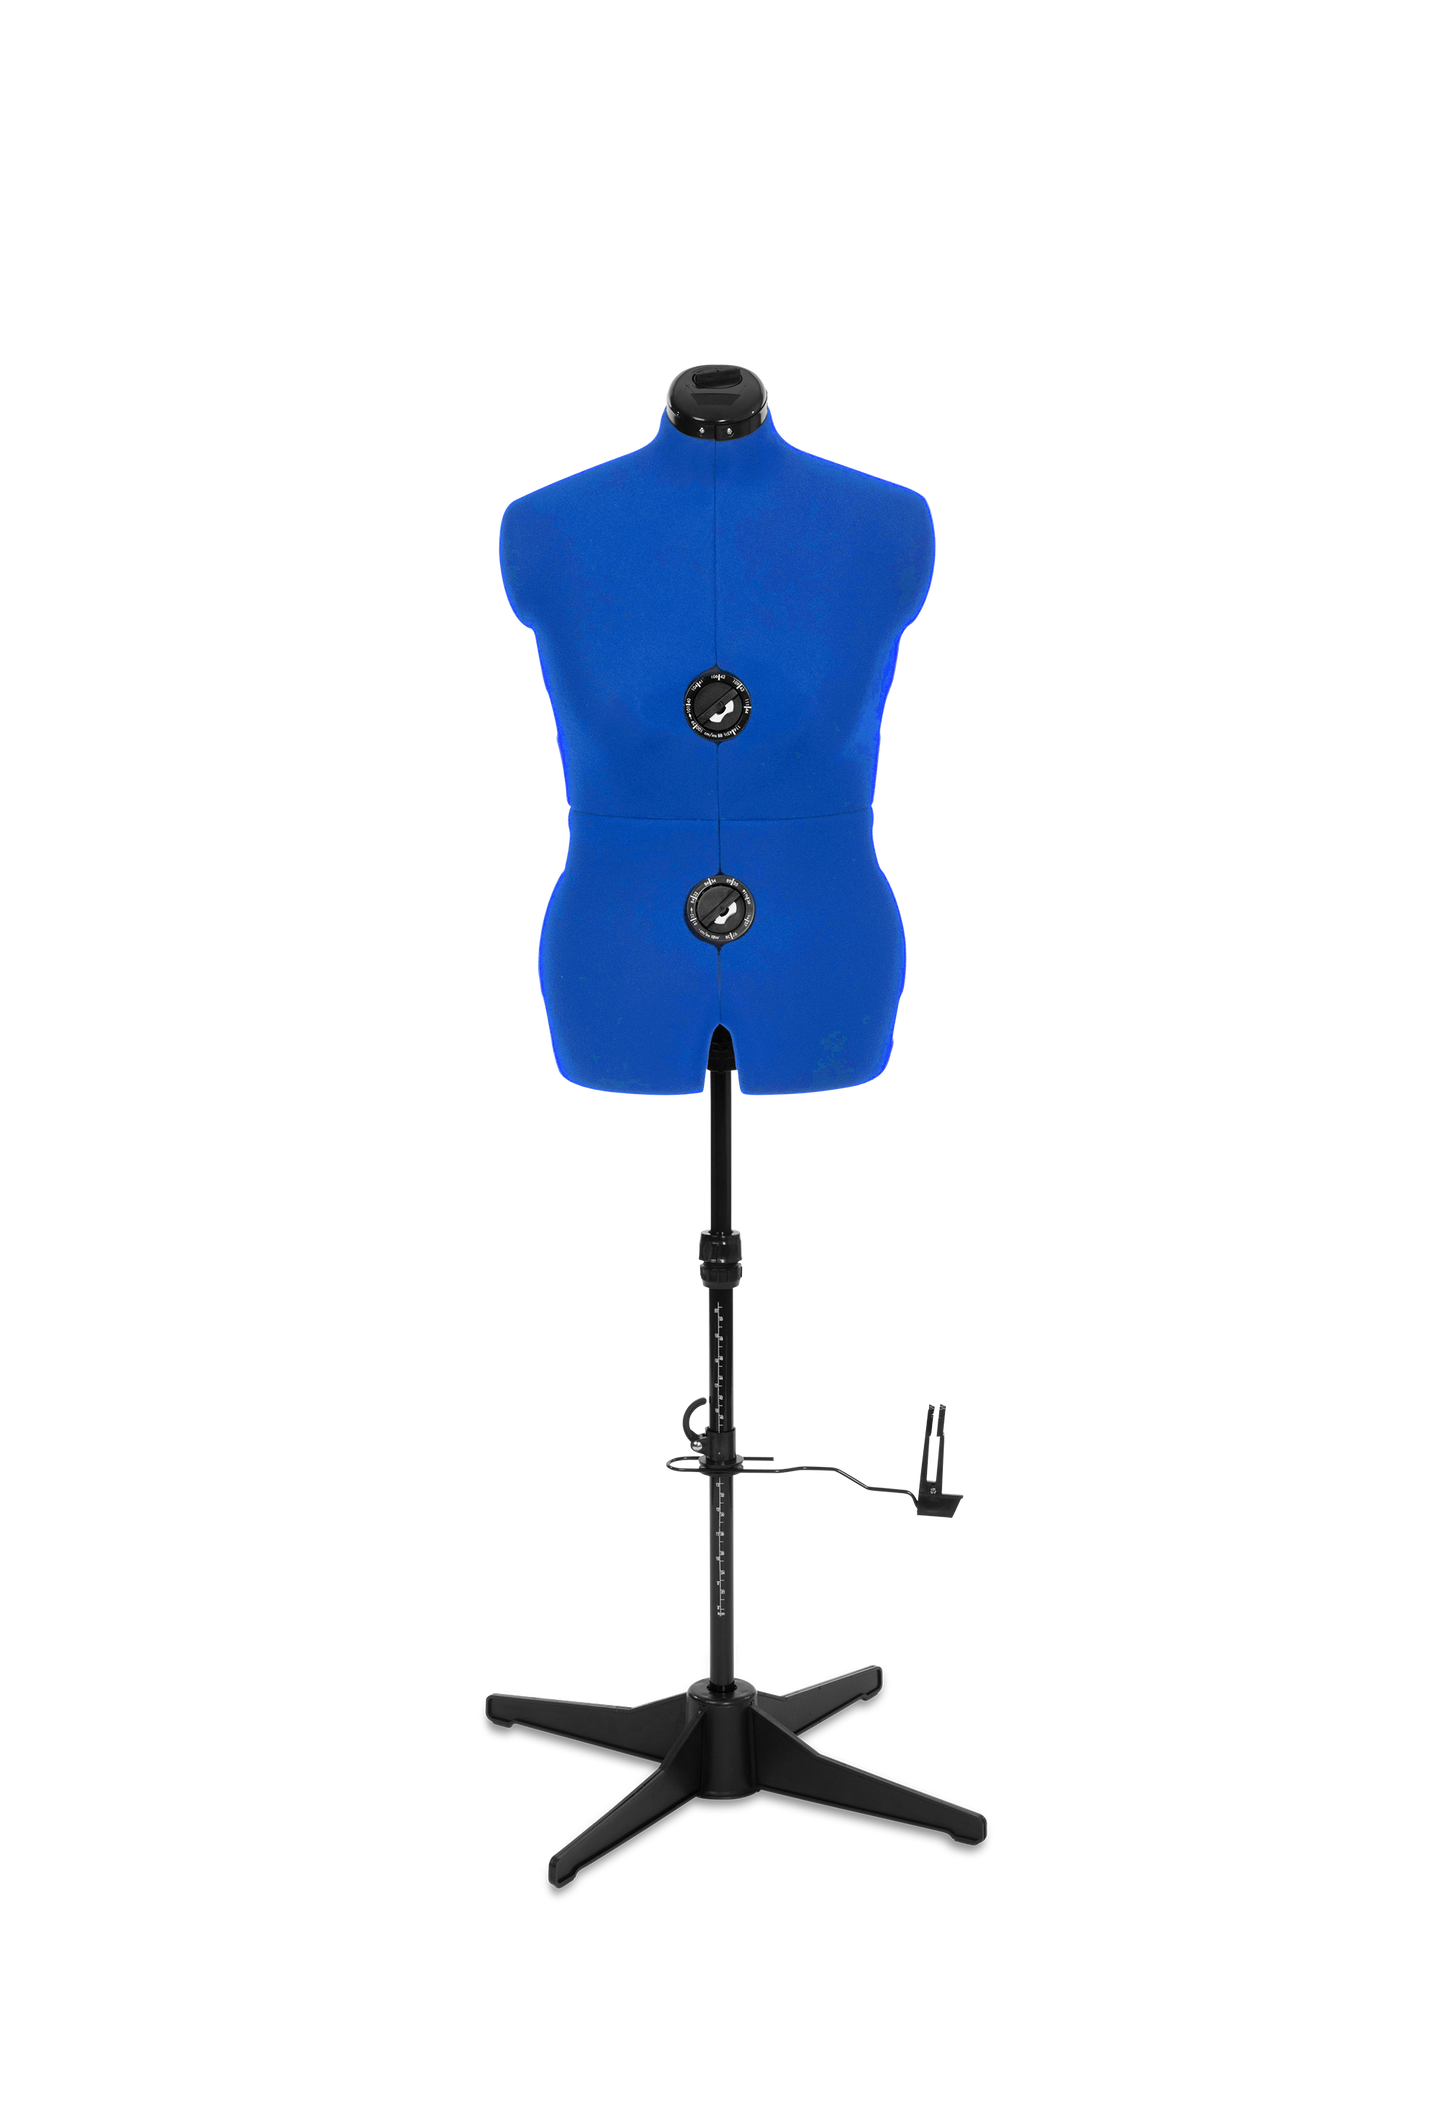 Adjustoform Elizabeth Tailormaid Dress Form with Stand and Base - Blue - Heavy Duty Adjustable Dress Form with 8 part body and 11 adjusters - Dress sizes from 6 to 24